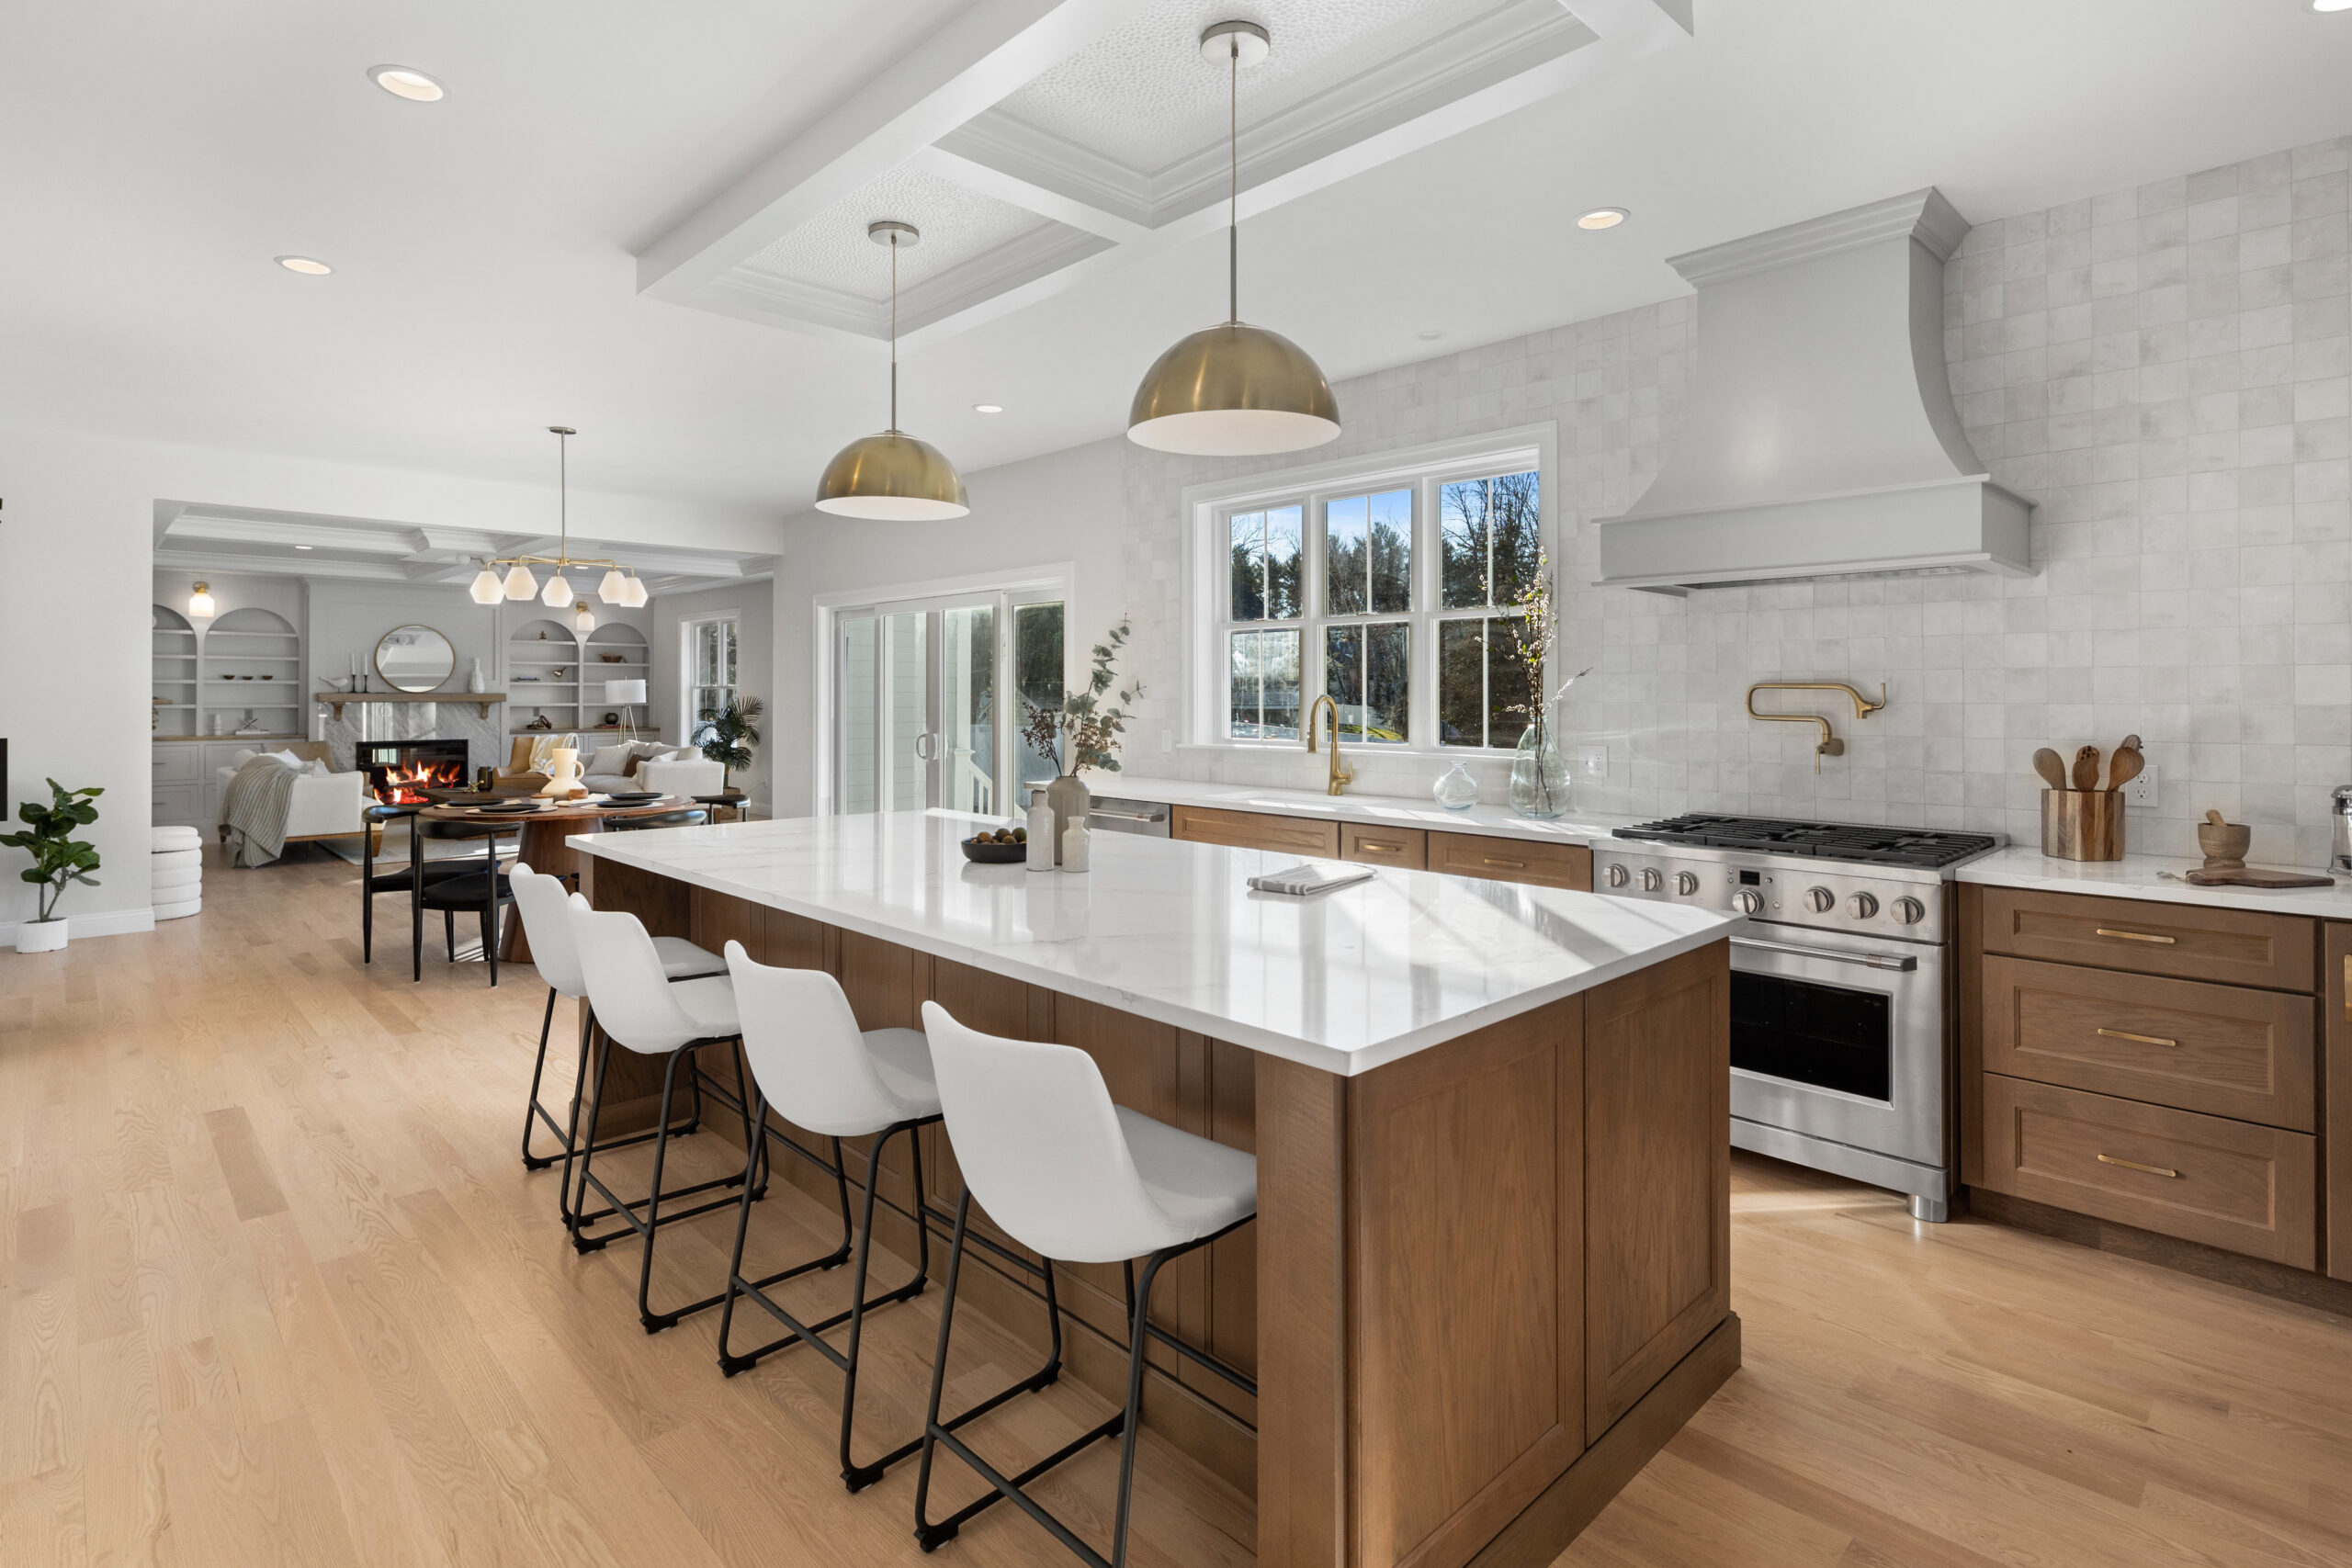 An expansive open-concept kitchen with a large center island featuring a white countertop and wooden base, providing seating for several people on sleek white stools with black legs. Gold pendant lights hang above the island, adding a touch of luxury to the space. The kitchen boasts a professional-grade stainless steel stove and oven, with a white hood and a herringbone tile backsplash. Gold fixtures and hardware complement the warm wooden tones of the cabinets. The view through the window shows a bright, clear day. Beyond the kitchen, the living area is visible, with a cozy fireplace and a relaxing seating arrangement. The entire space is unified with light hardwood flooring and a white coffered ceiling with recessed lighting.